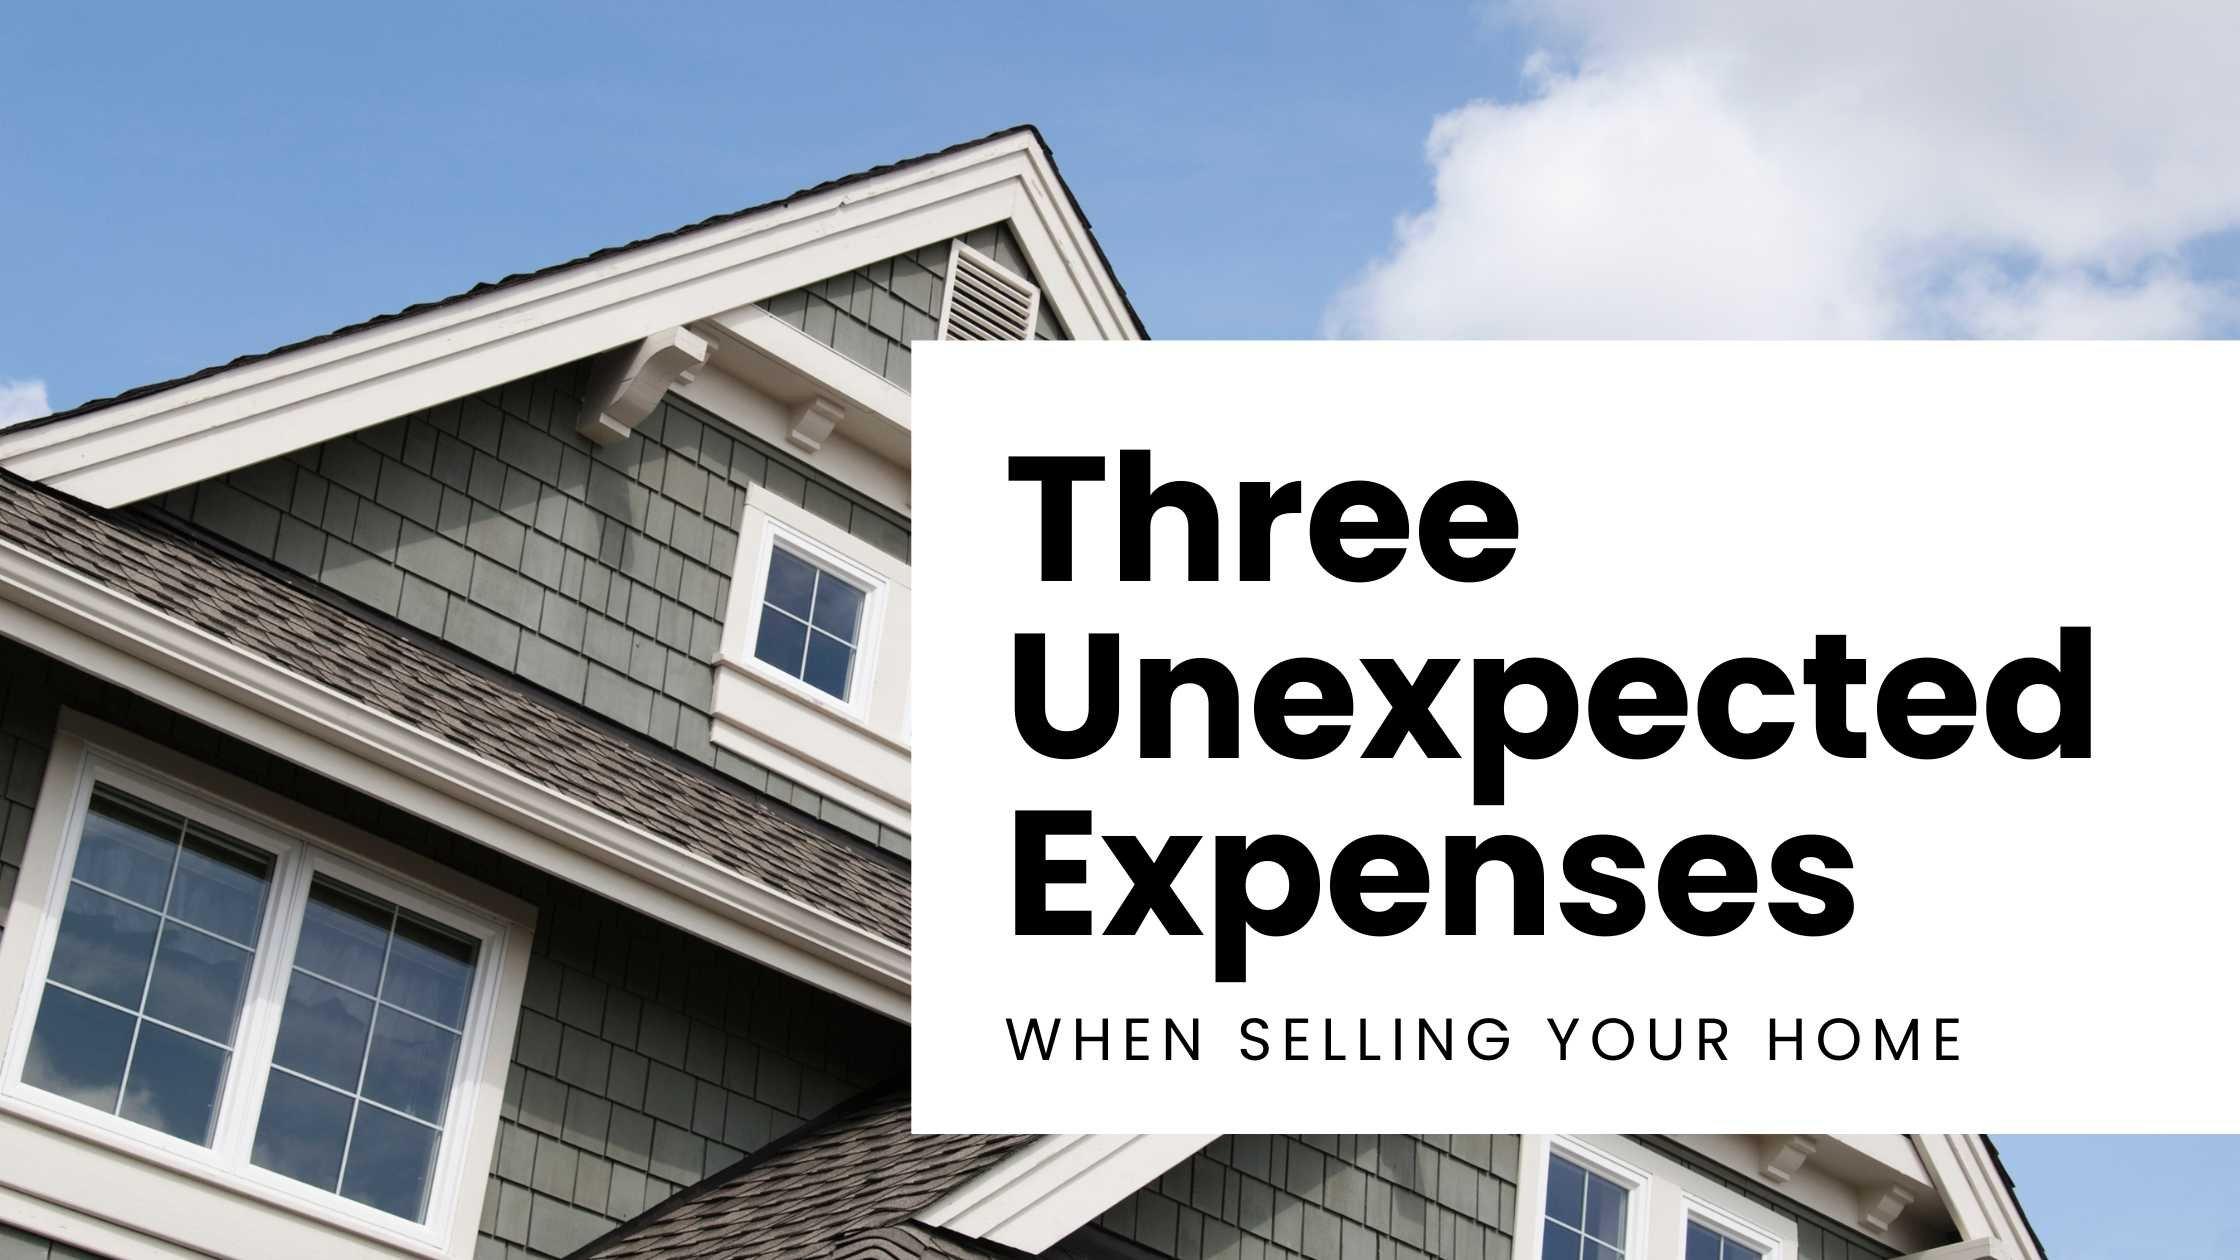 The Three Unexpected Expenses You’ll Face When Selling Your Home in Northern Virginia